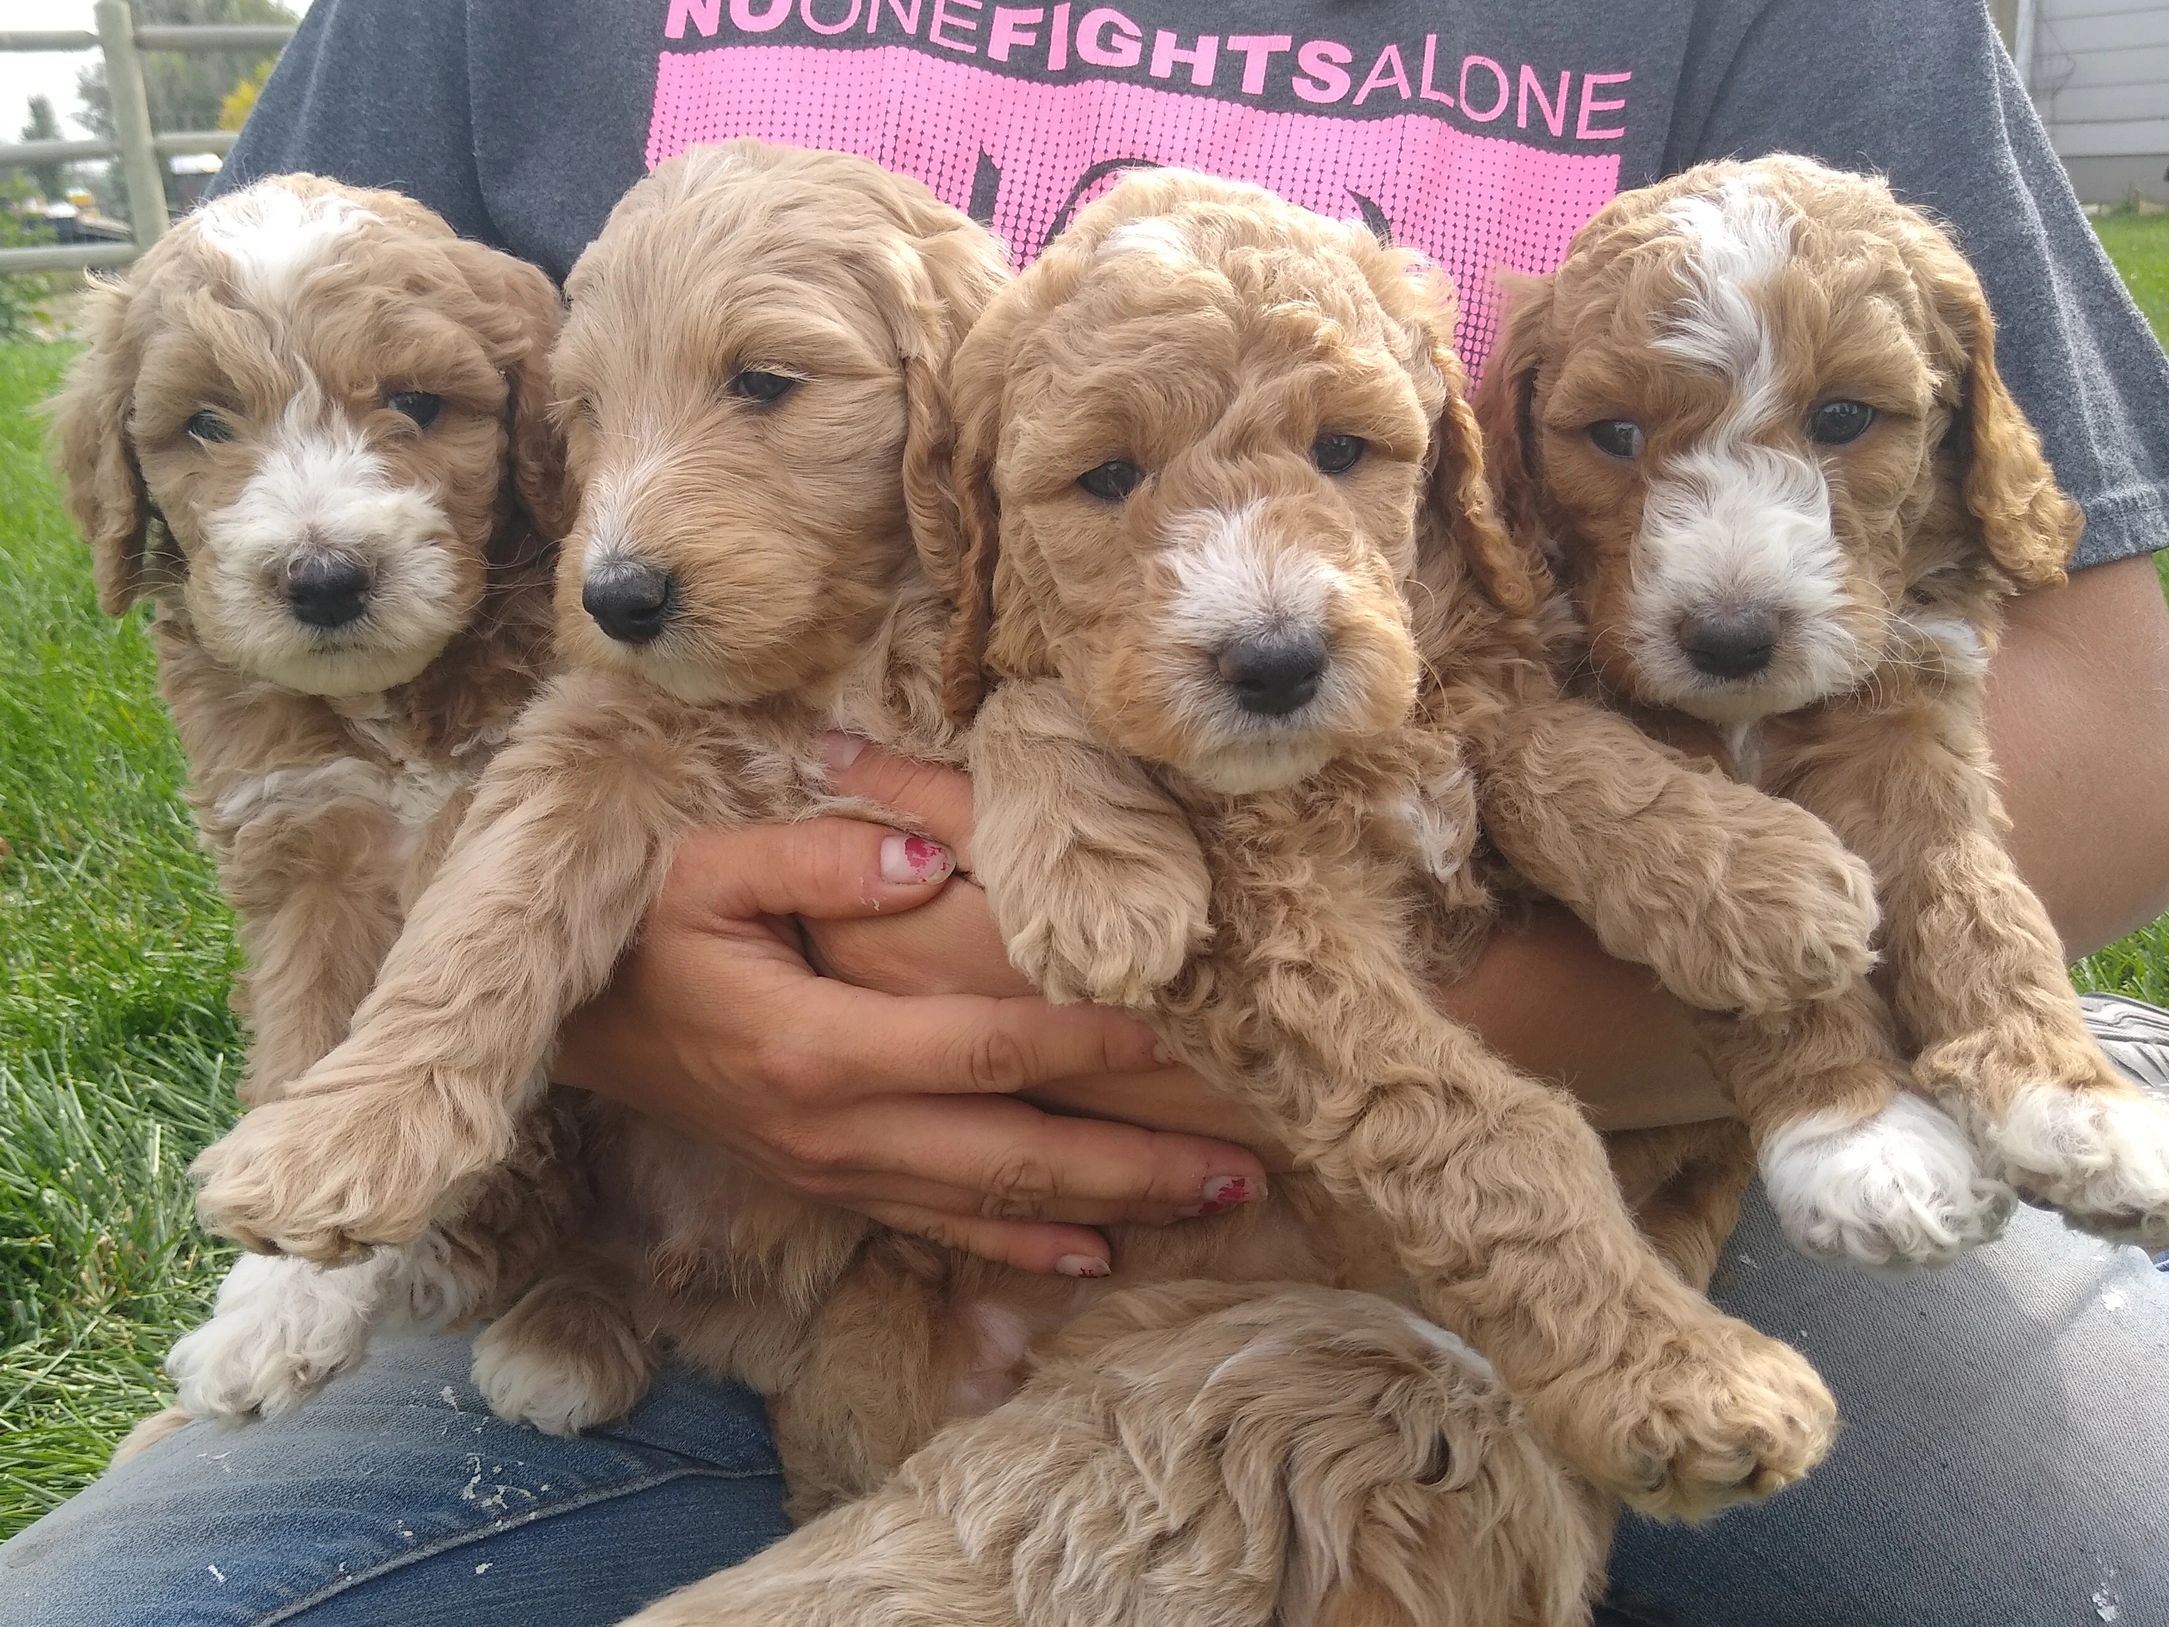 Miniature goldendoodle puppies for sale in Montana.